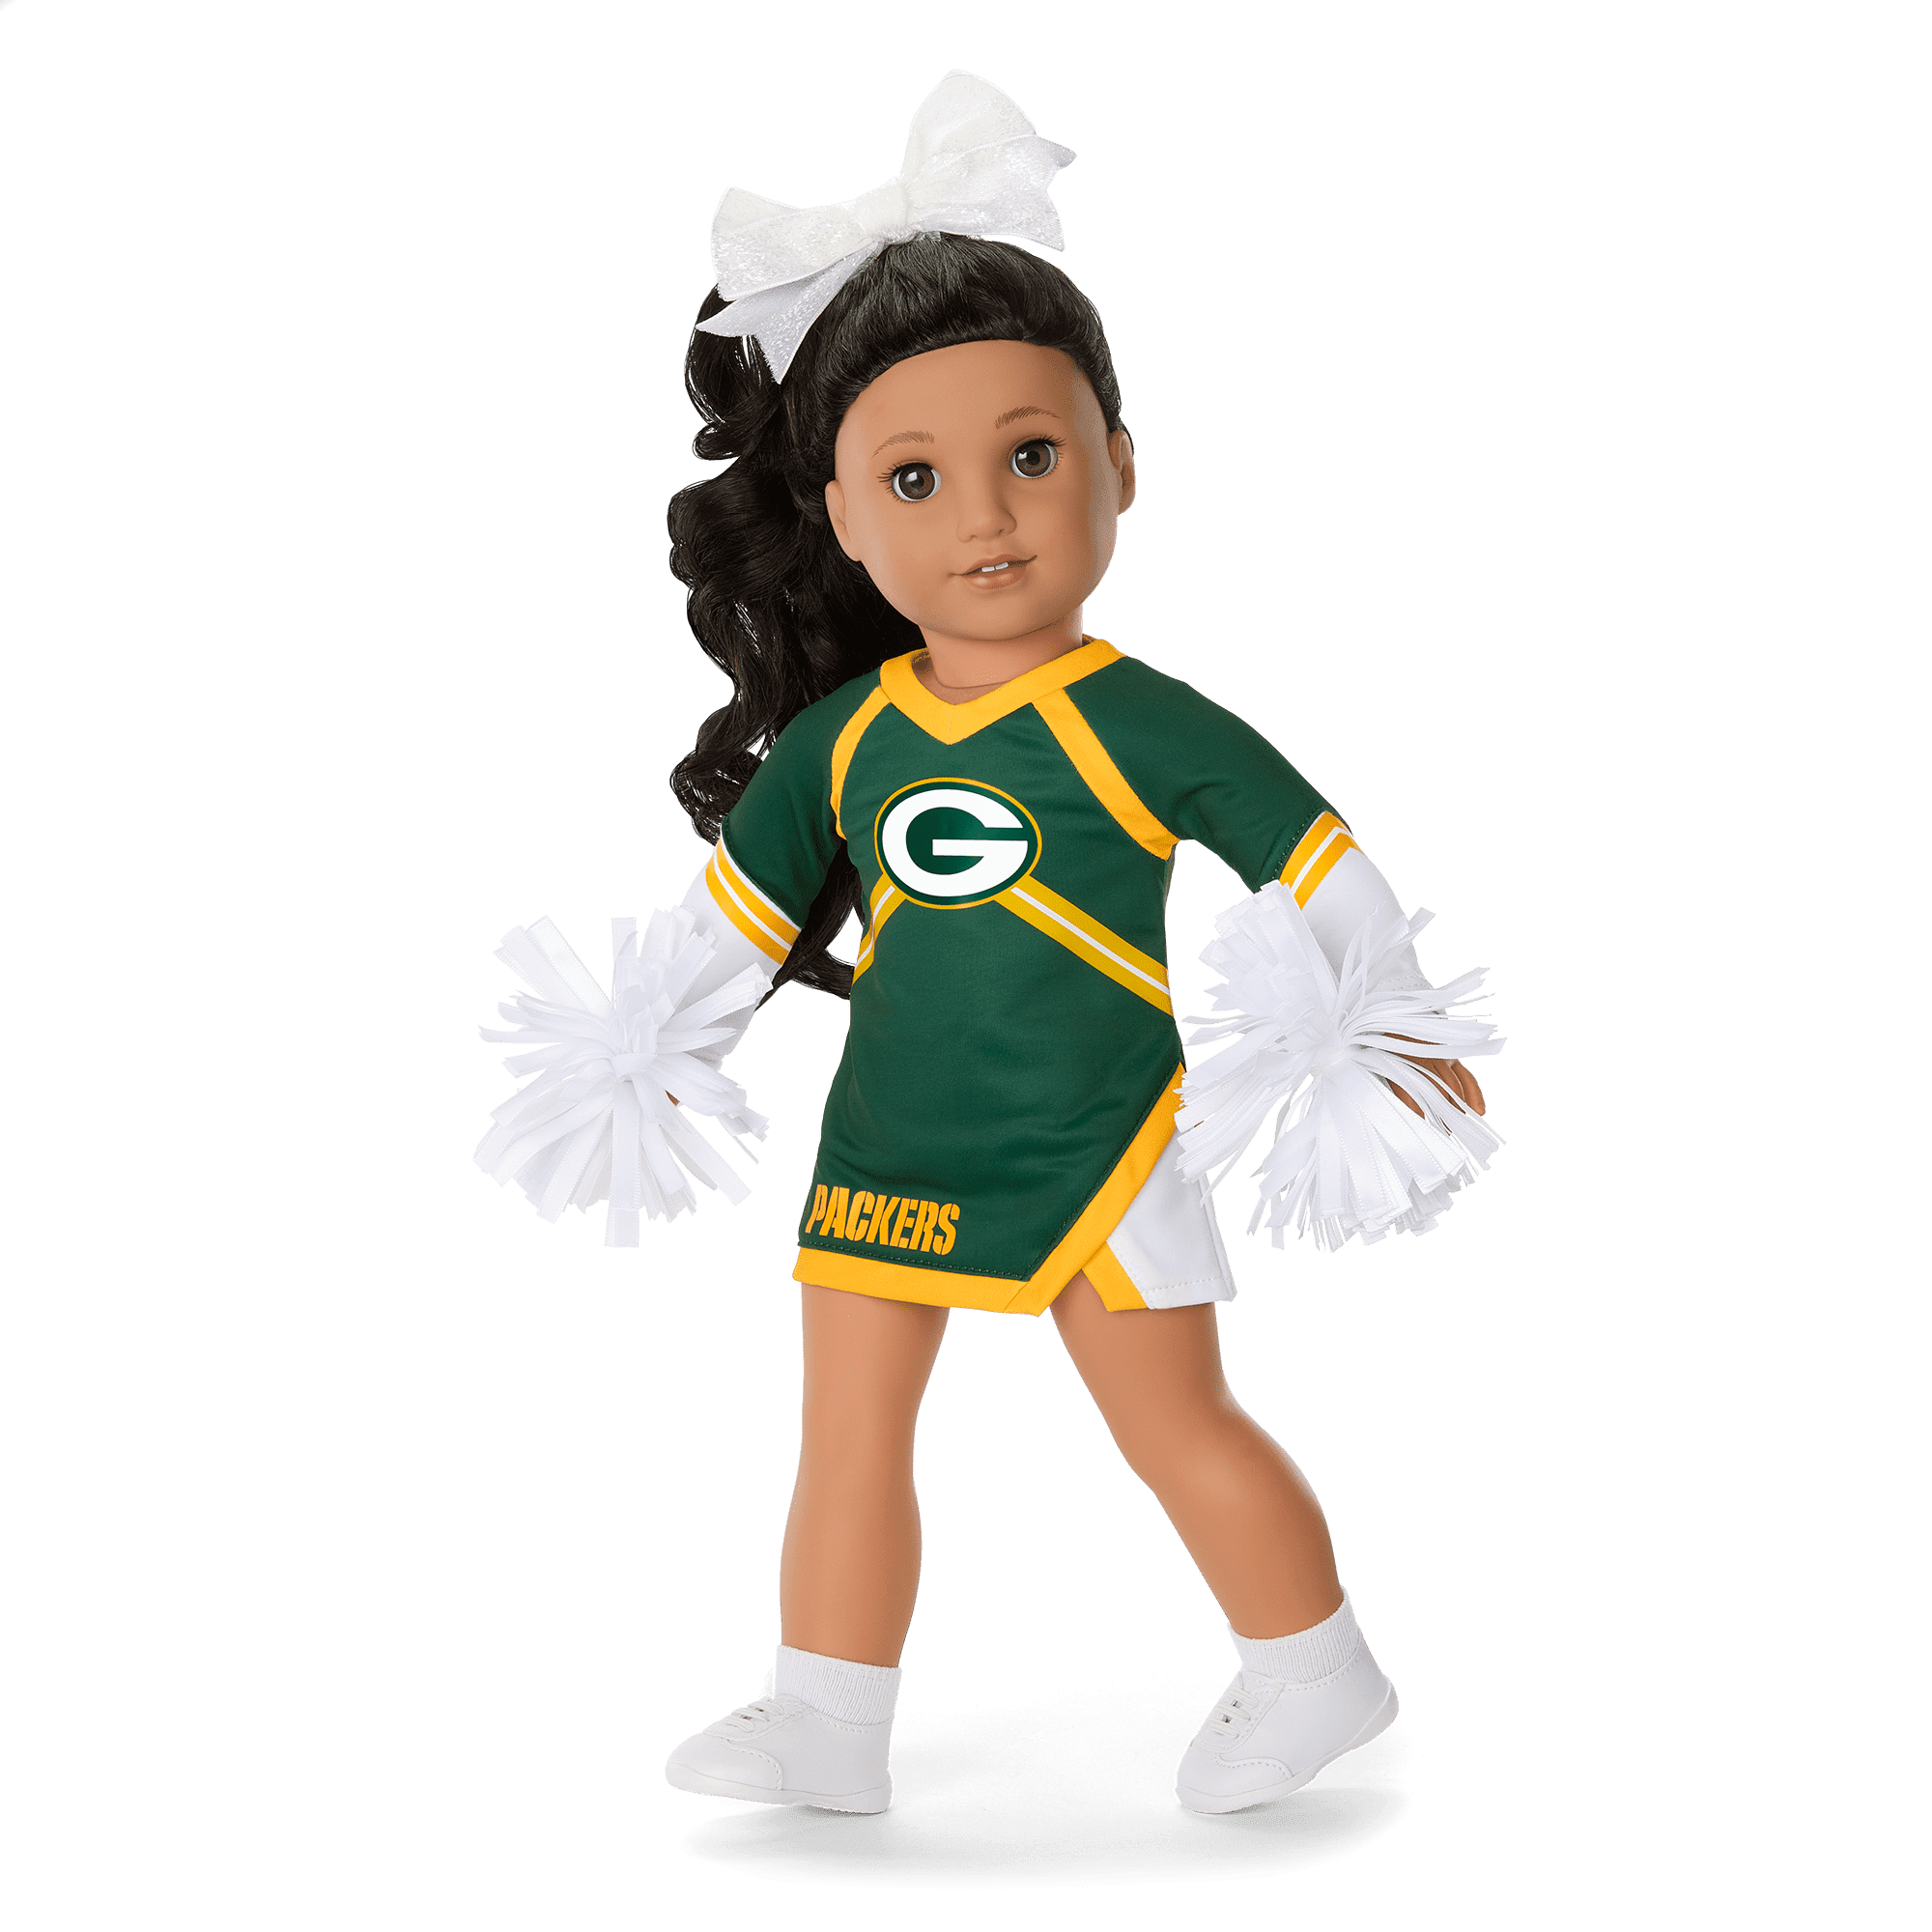 American Girl® x NFL Green Bay Packers Cheer Uniform for 18-inch Dolls